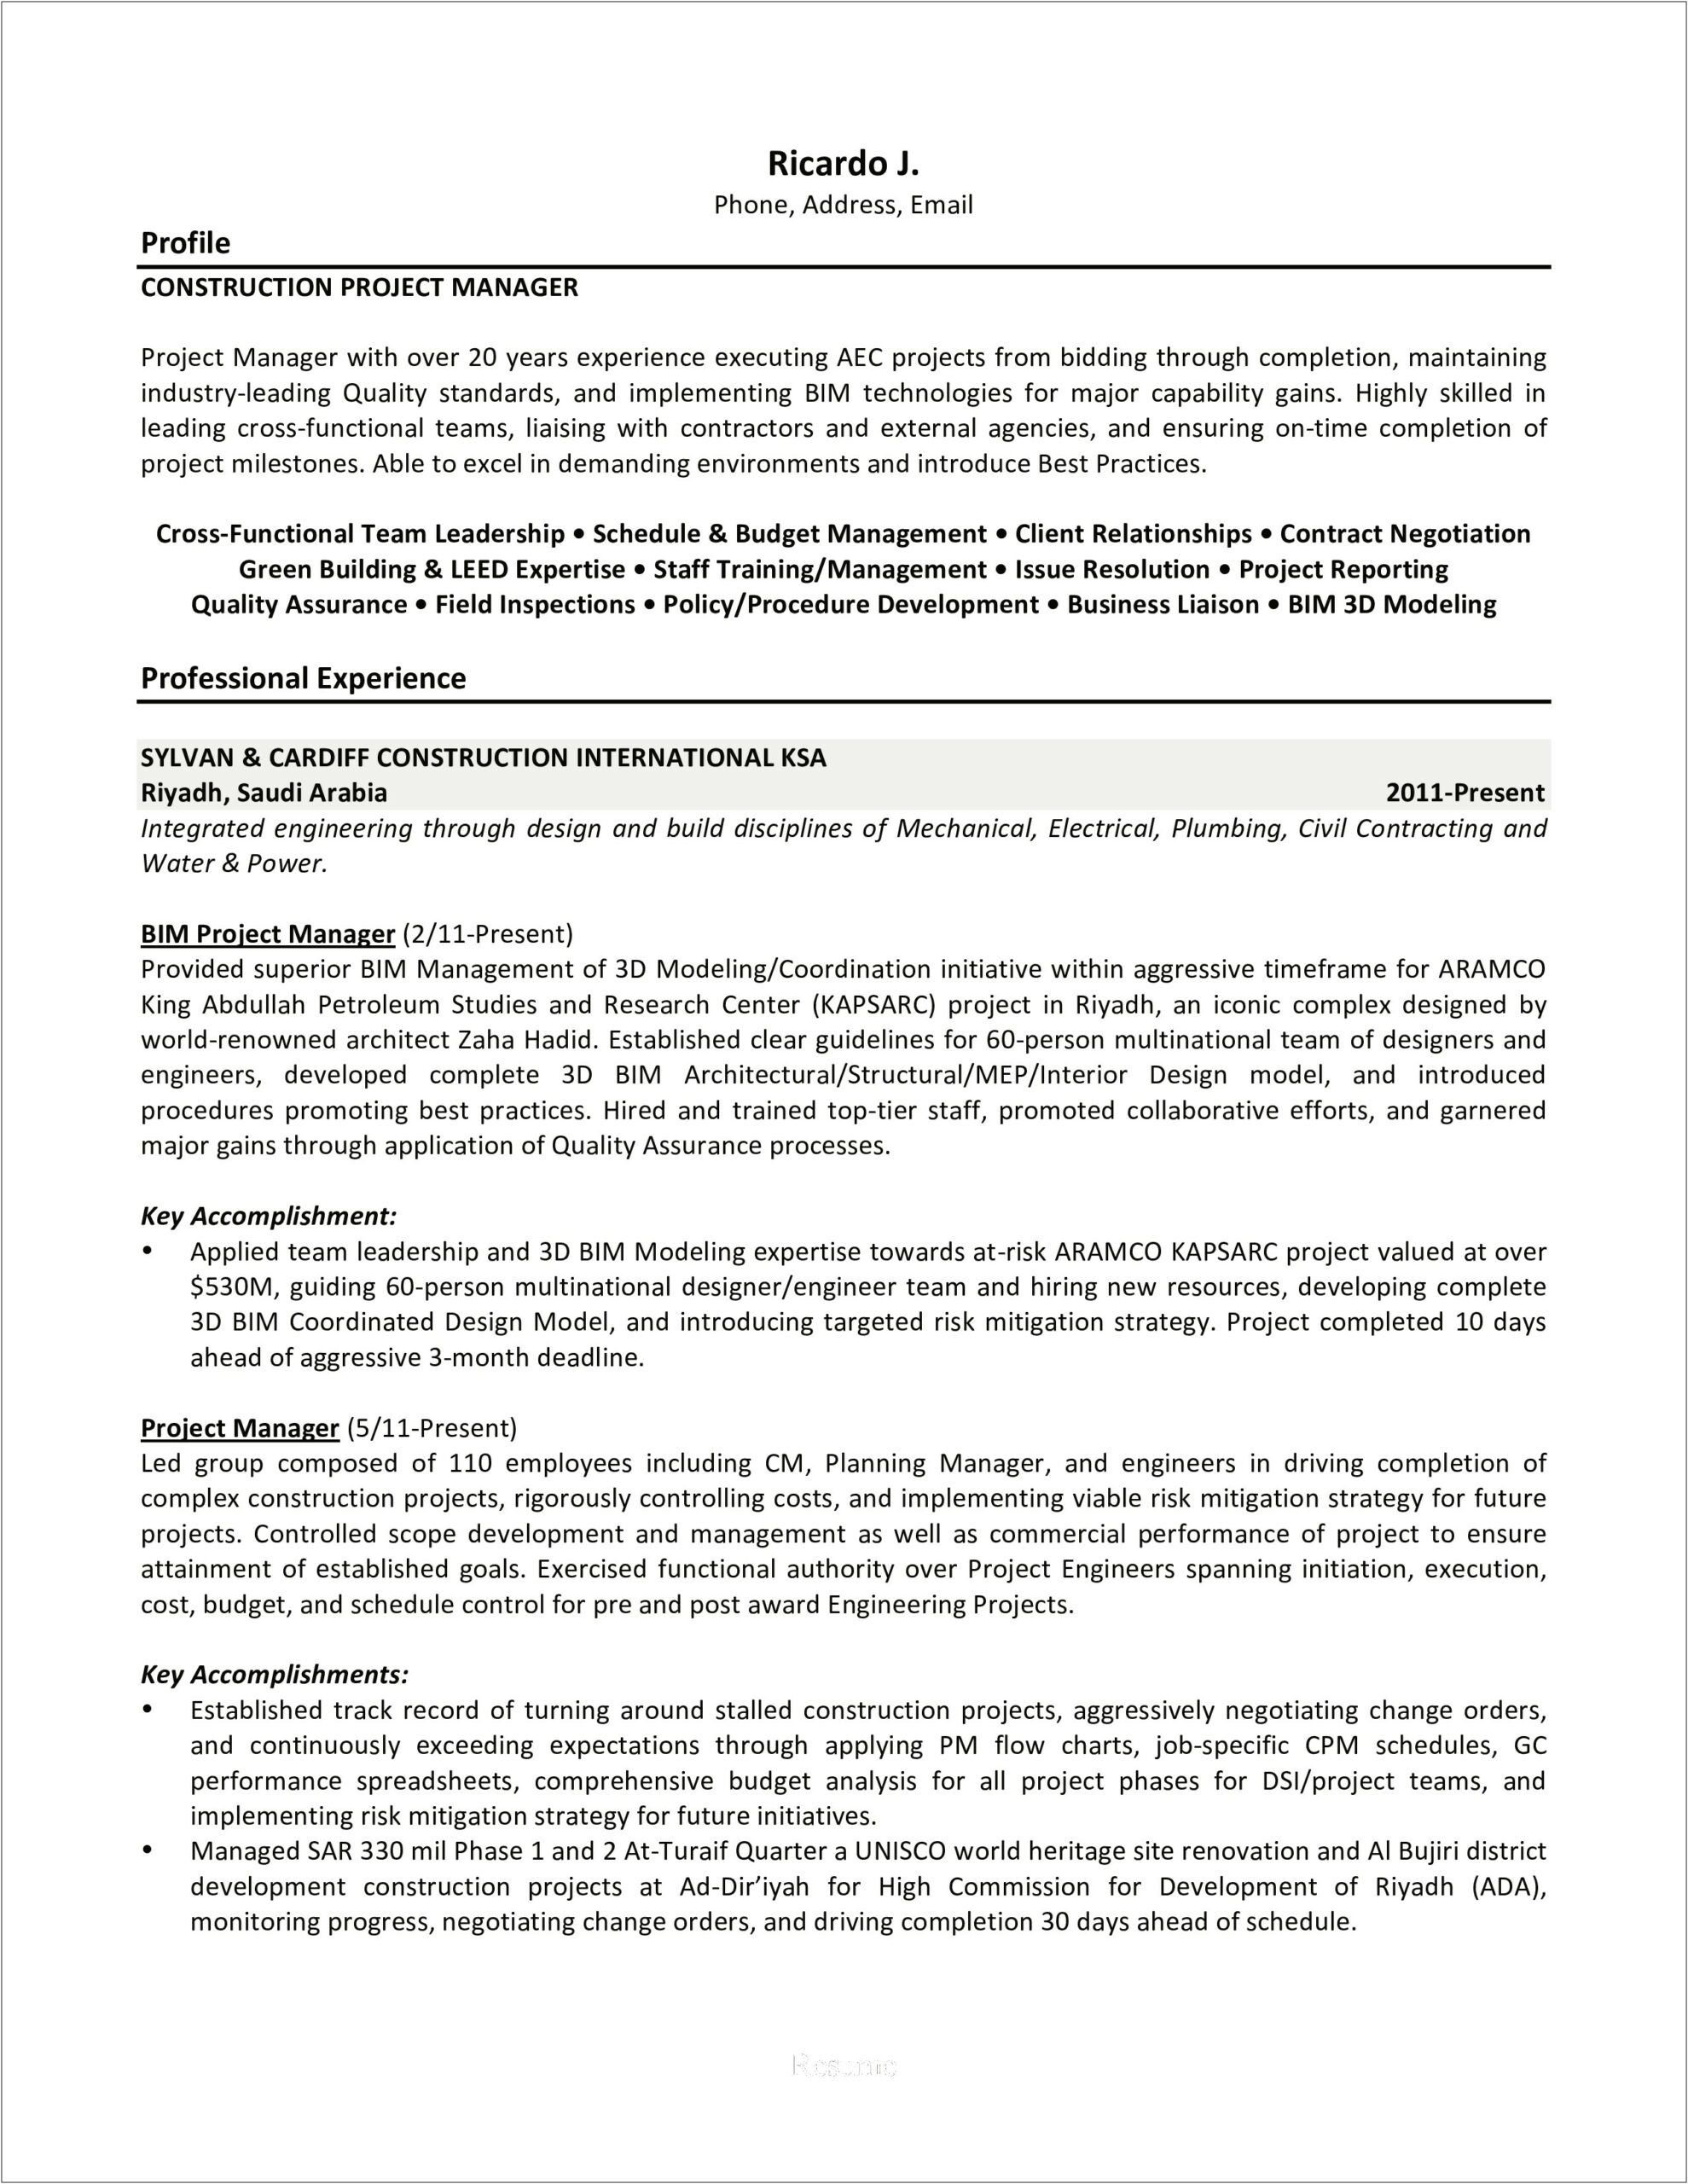 Sample Resumes Of Construction Managers